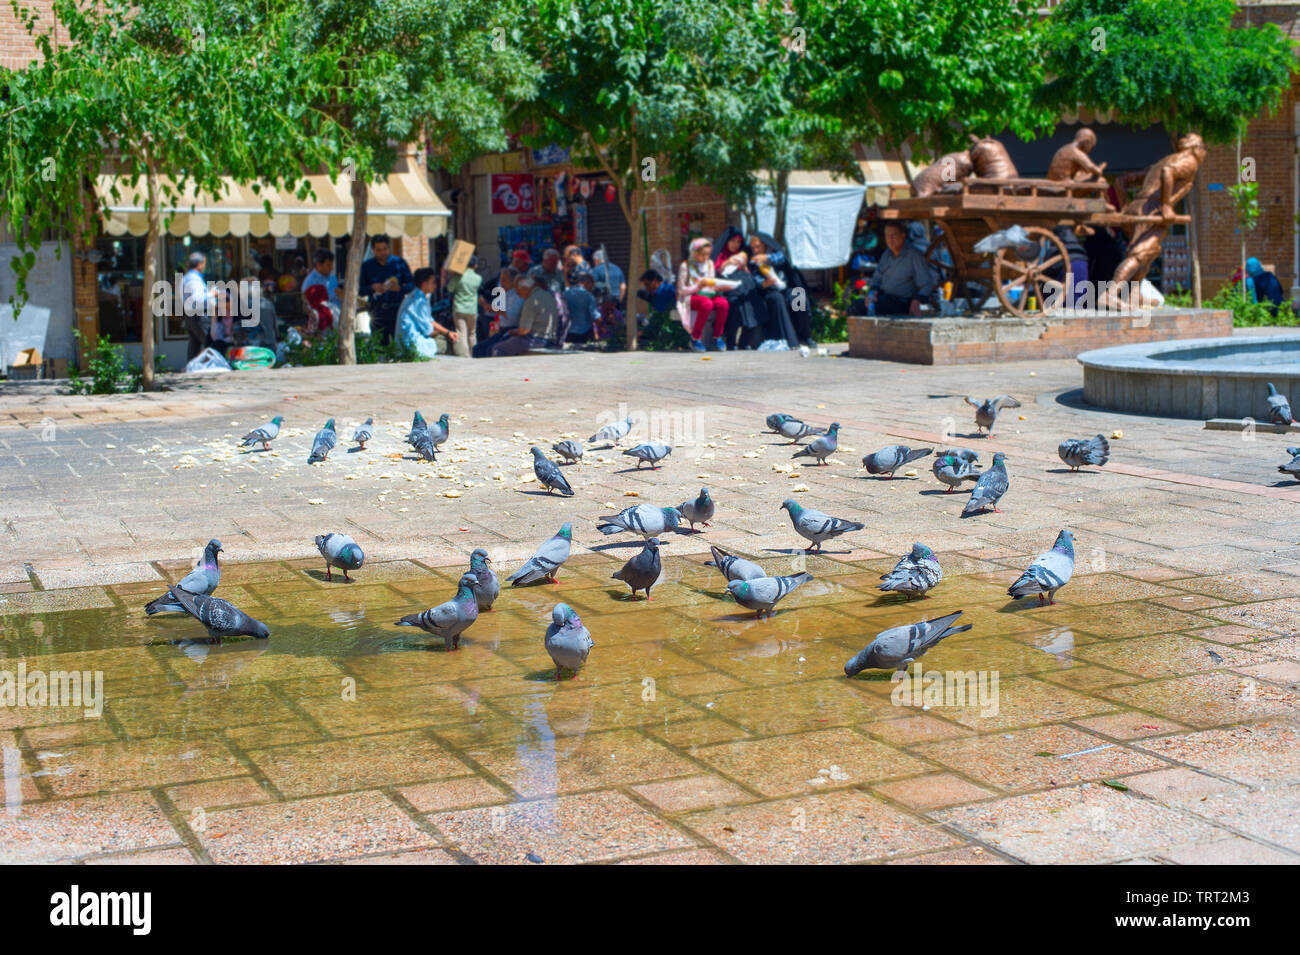 Pigeons bathing in a puddle on a central square of Tehran, Iran Stock Photo